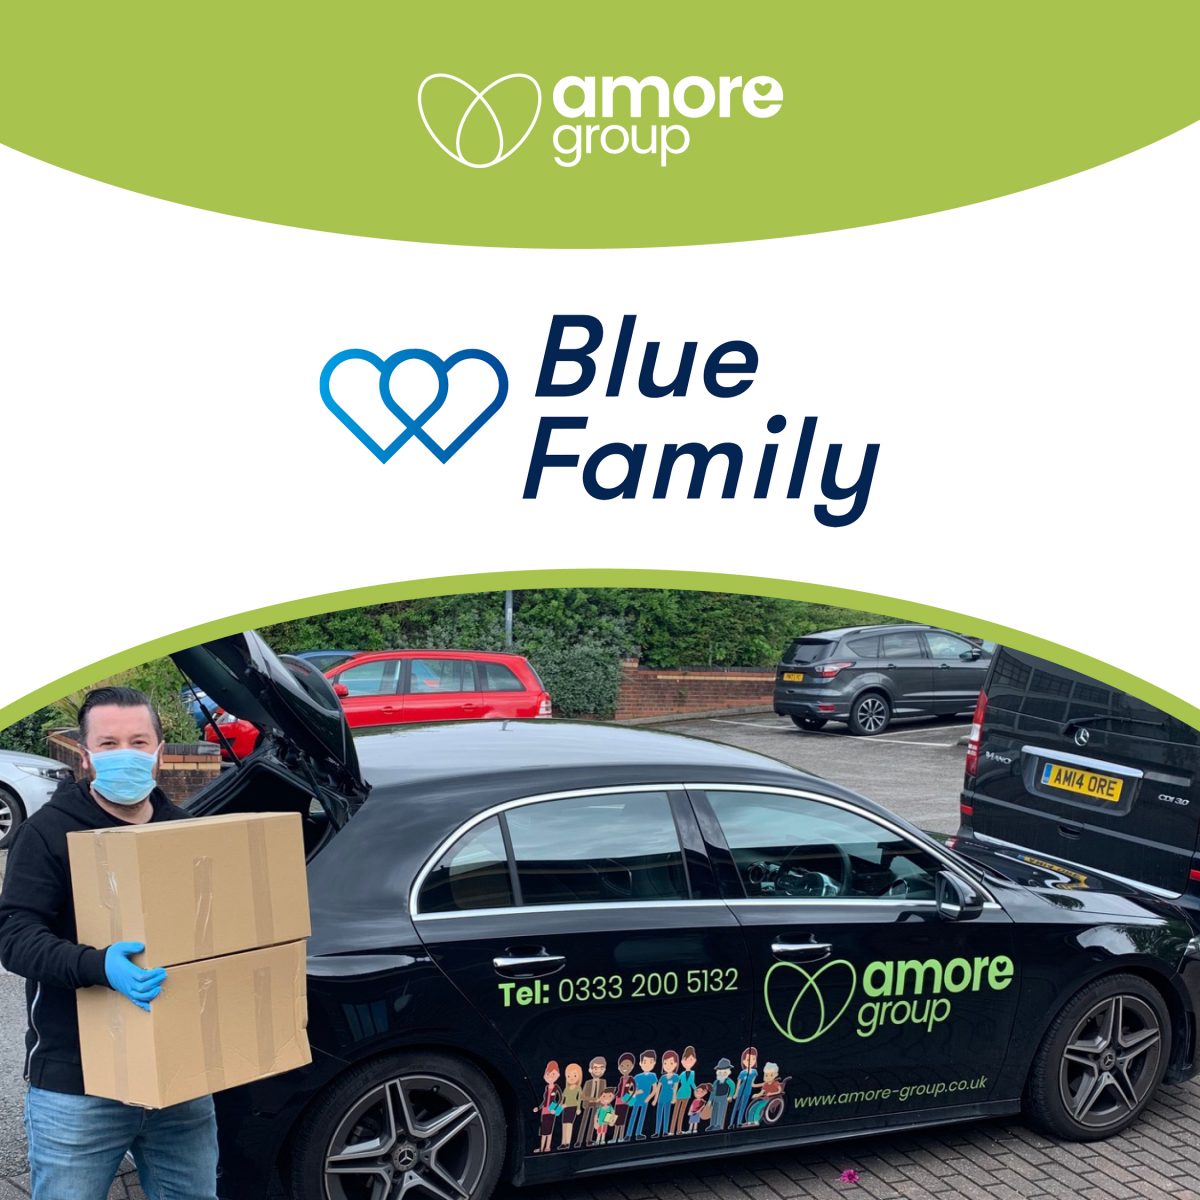 The Amore Family and the Blue Family partnership